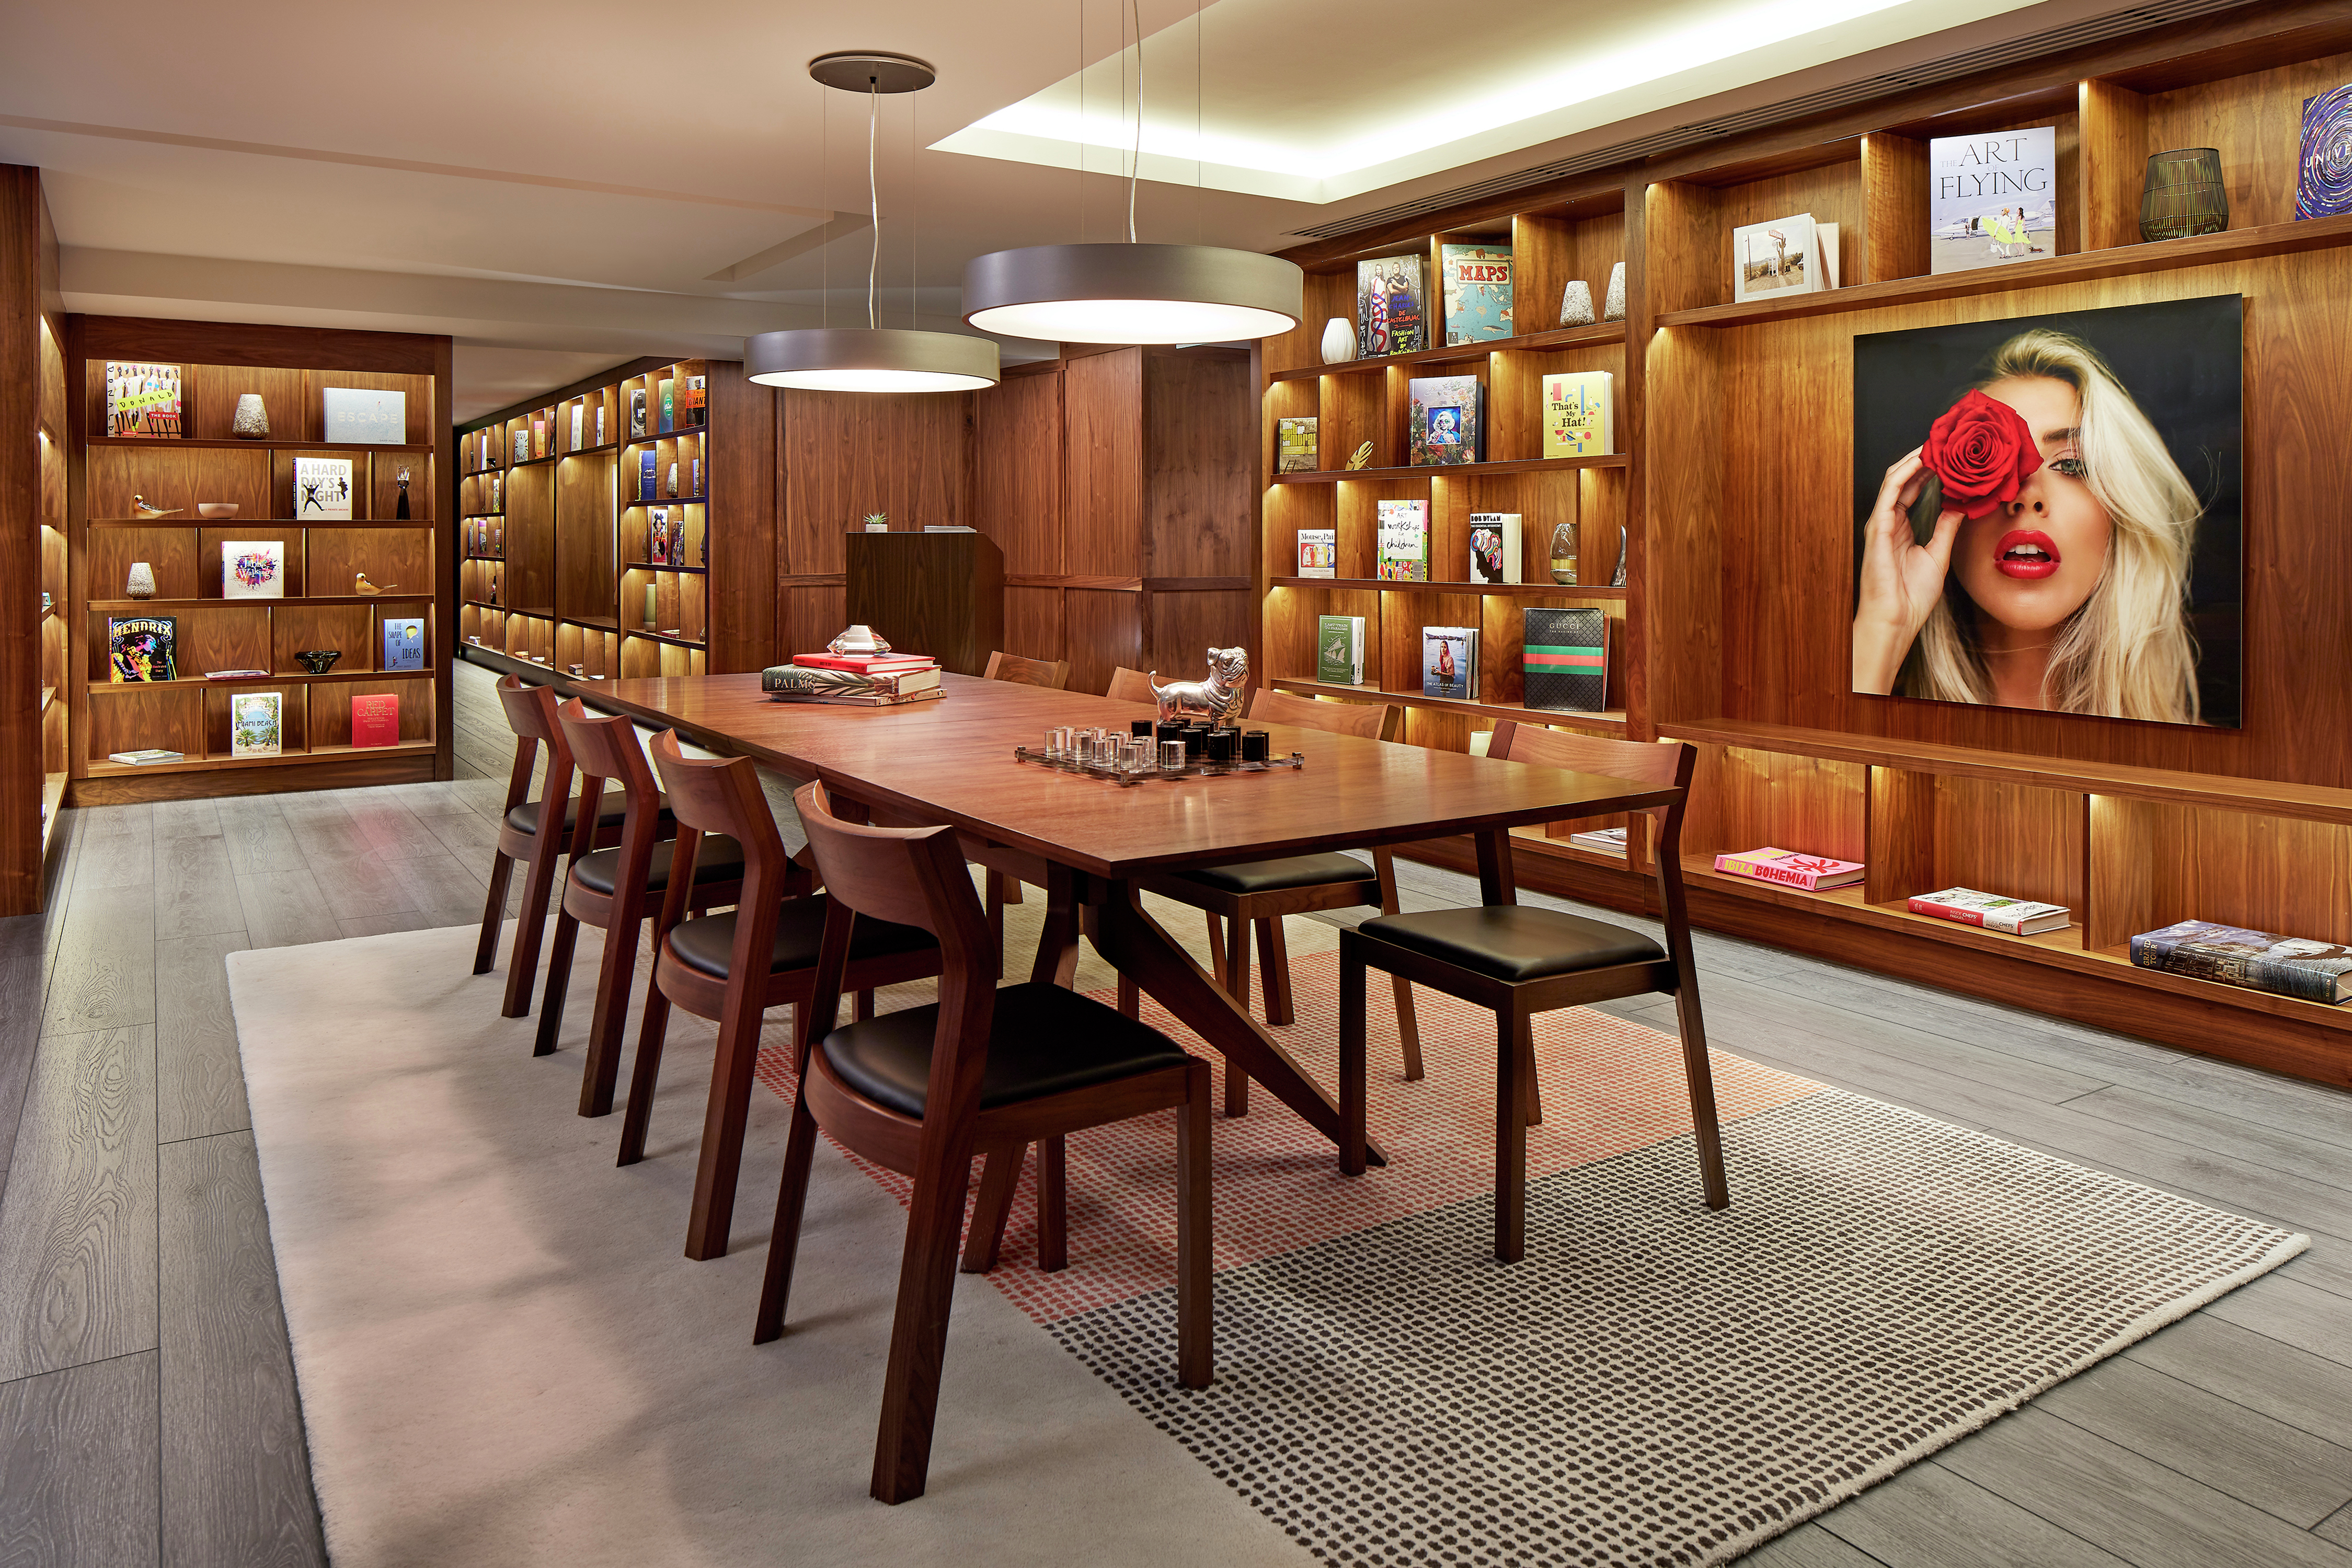 Library with Table, Chairs, and Walls of Books